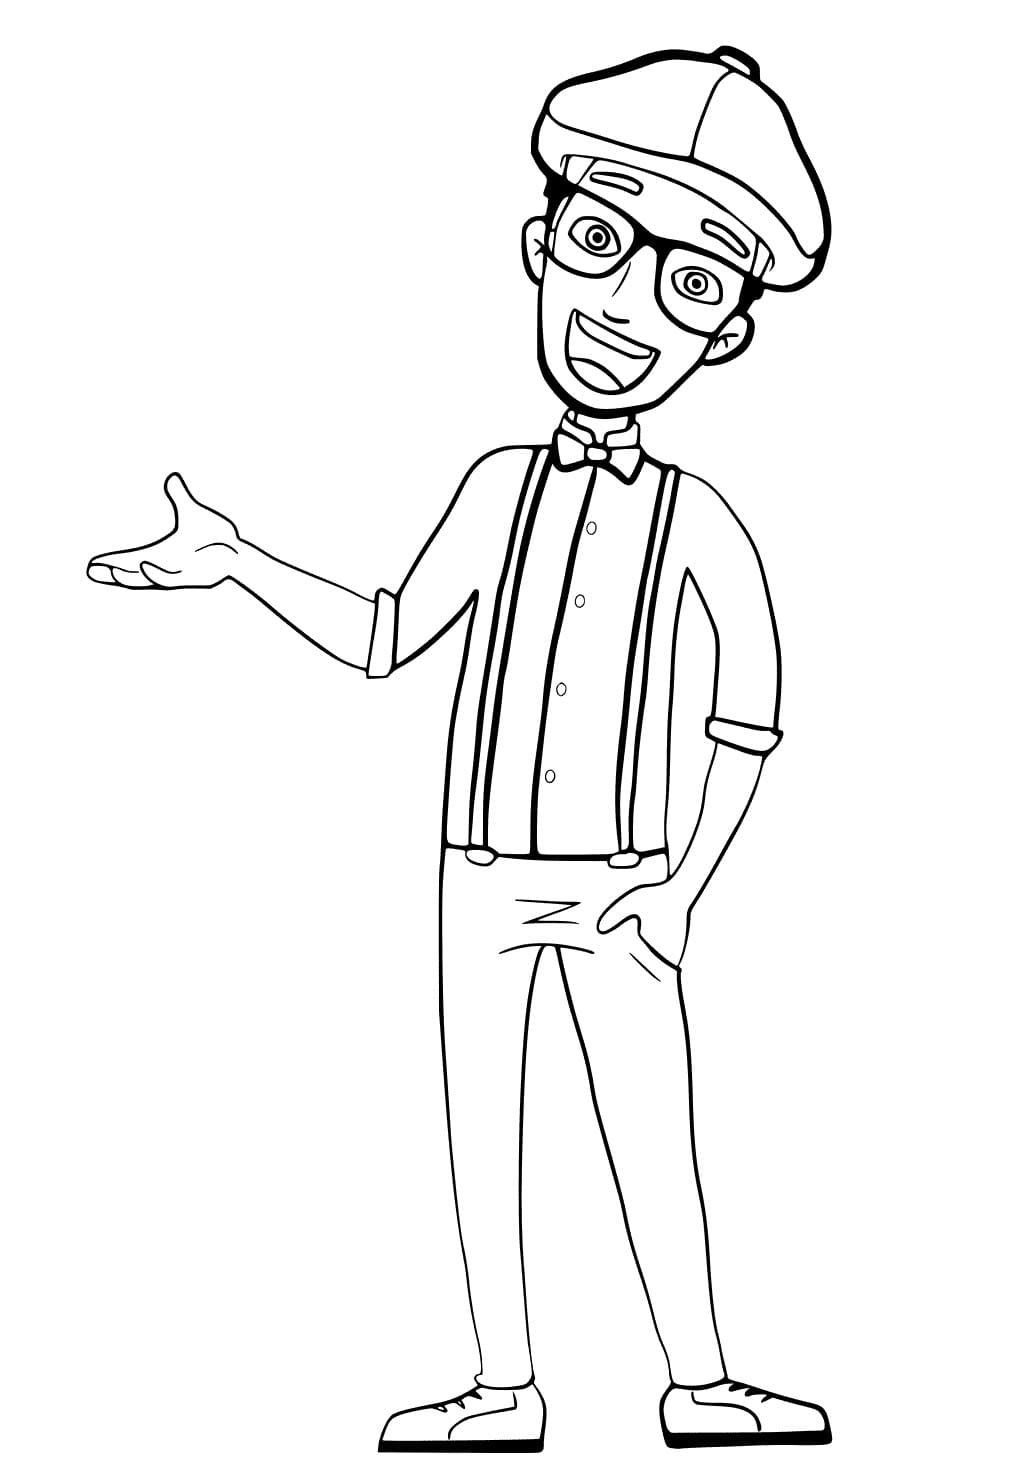 Blippi coloring pages